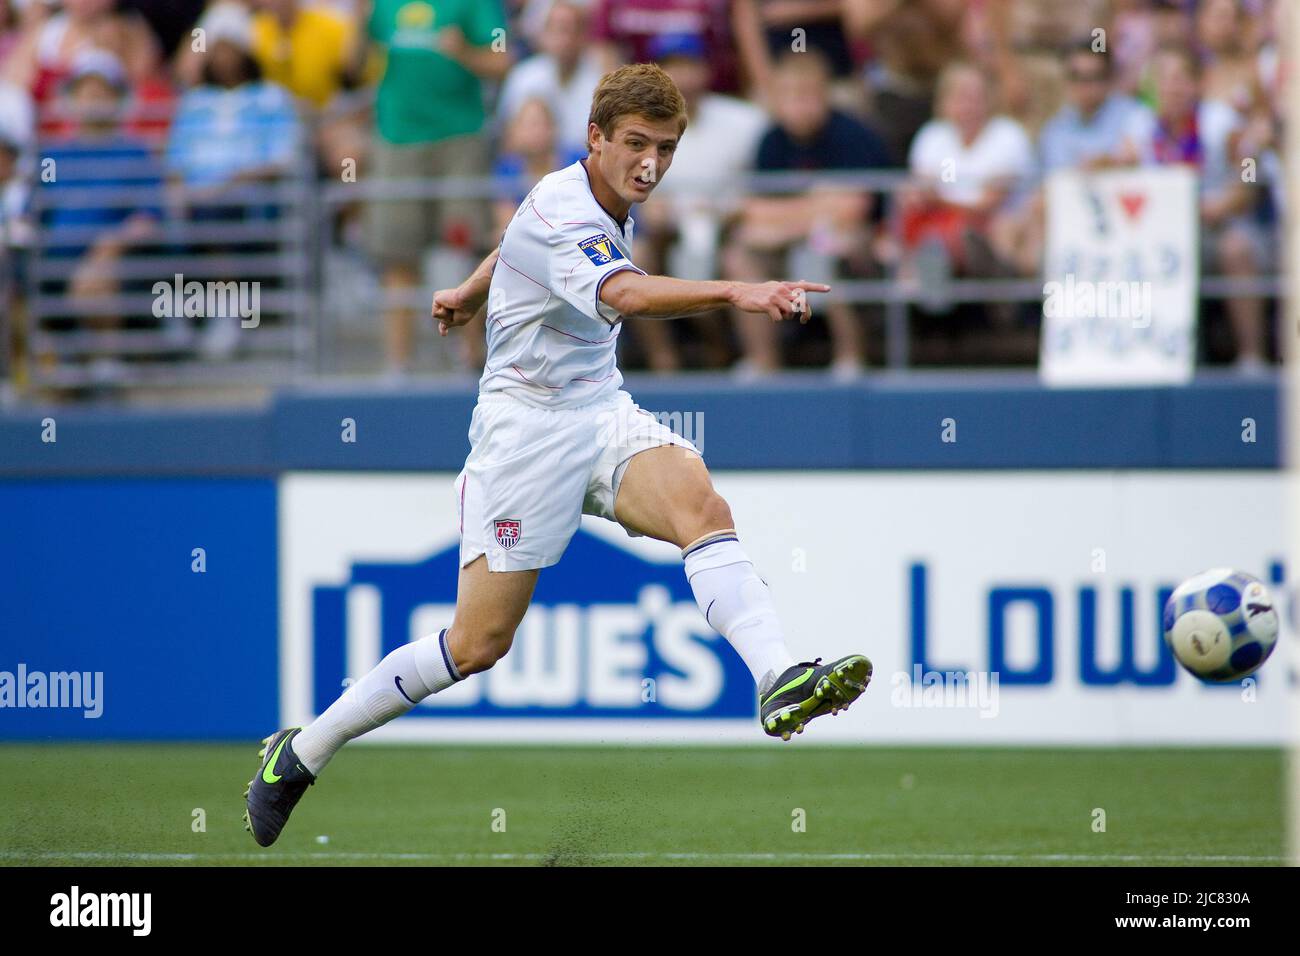 Seattle, Washington, USA. 04th July, 2009. 04 July 2009: Robbie Rogers (7) takes a shot on goal. Gold Cup 2009, Grenada vs. United States at Qwest Field in Seattle, WA. (Credit Image: © Andrew Fredrickson/Southcreek Global/ZUMApress.com) Stock Photo